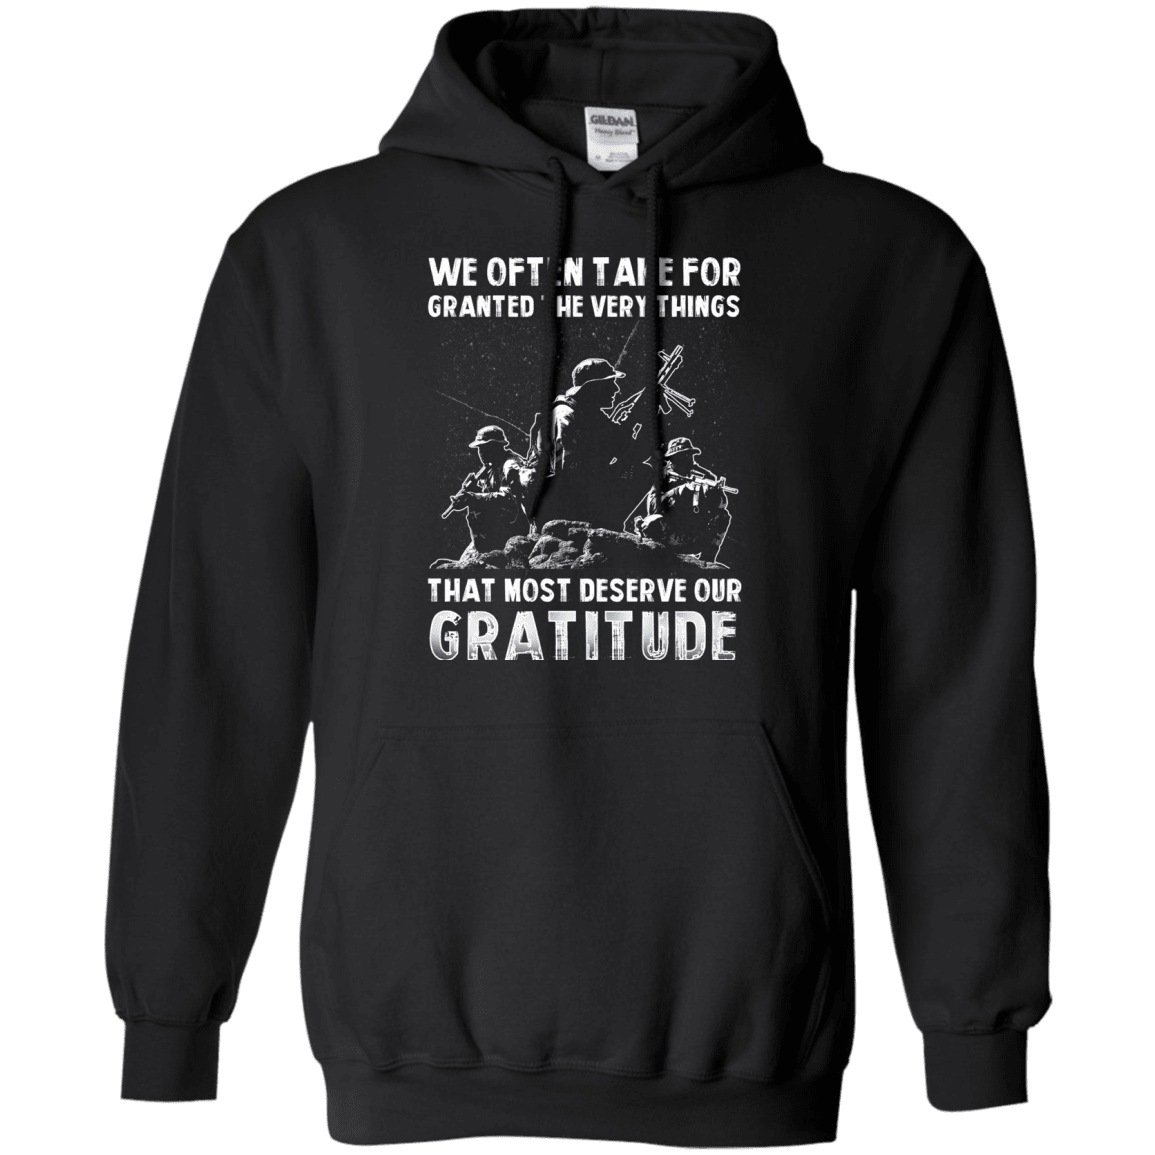 Military T-Shirt "We Often Take For Granted The Very Things"-TShirt-General-Veterans Nation